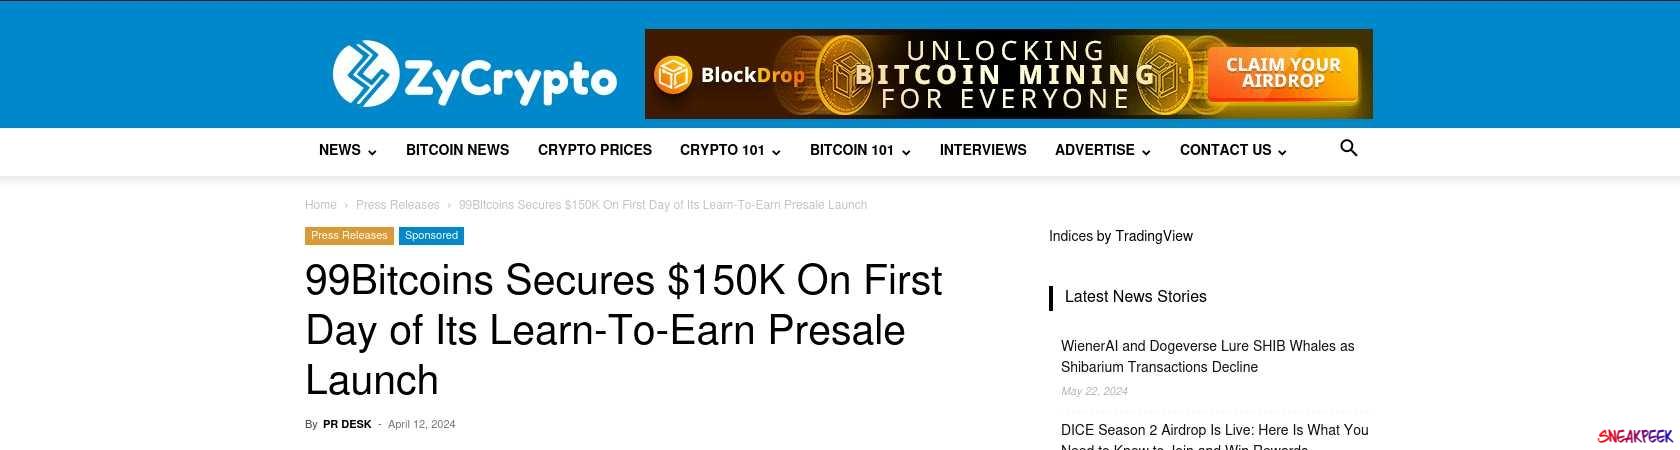 Read the full Article:  ⭲ 99Bitcoins Secures $150K On First Day of Its Learn-To-Earn Presale Launch